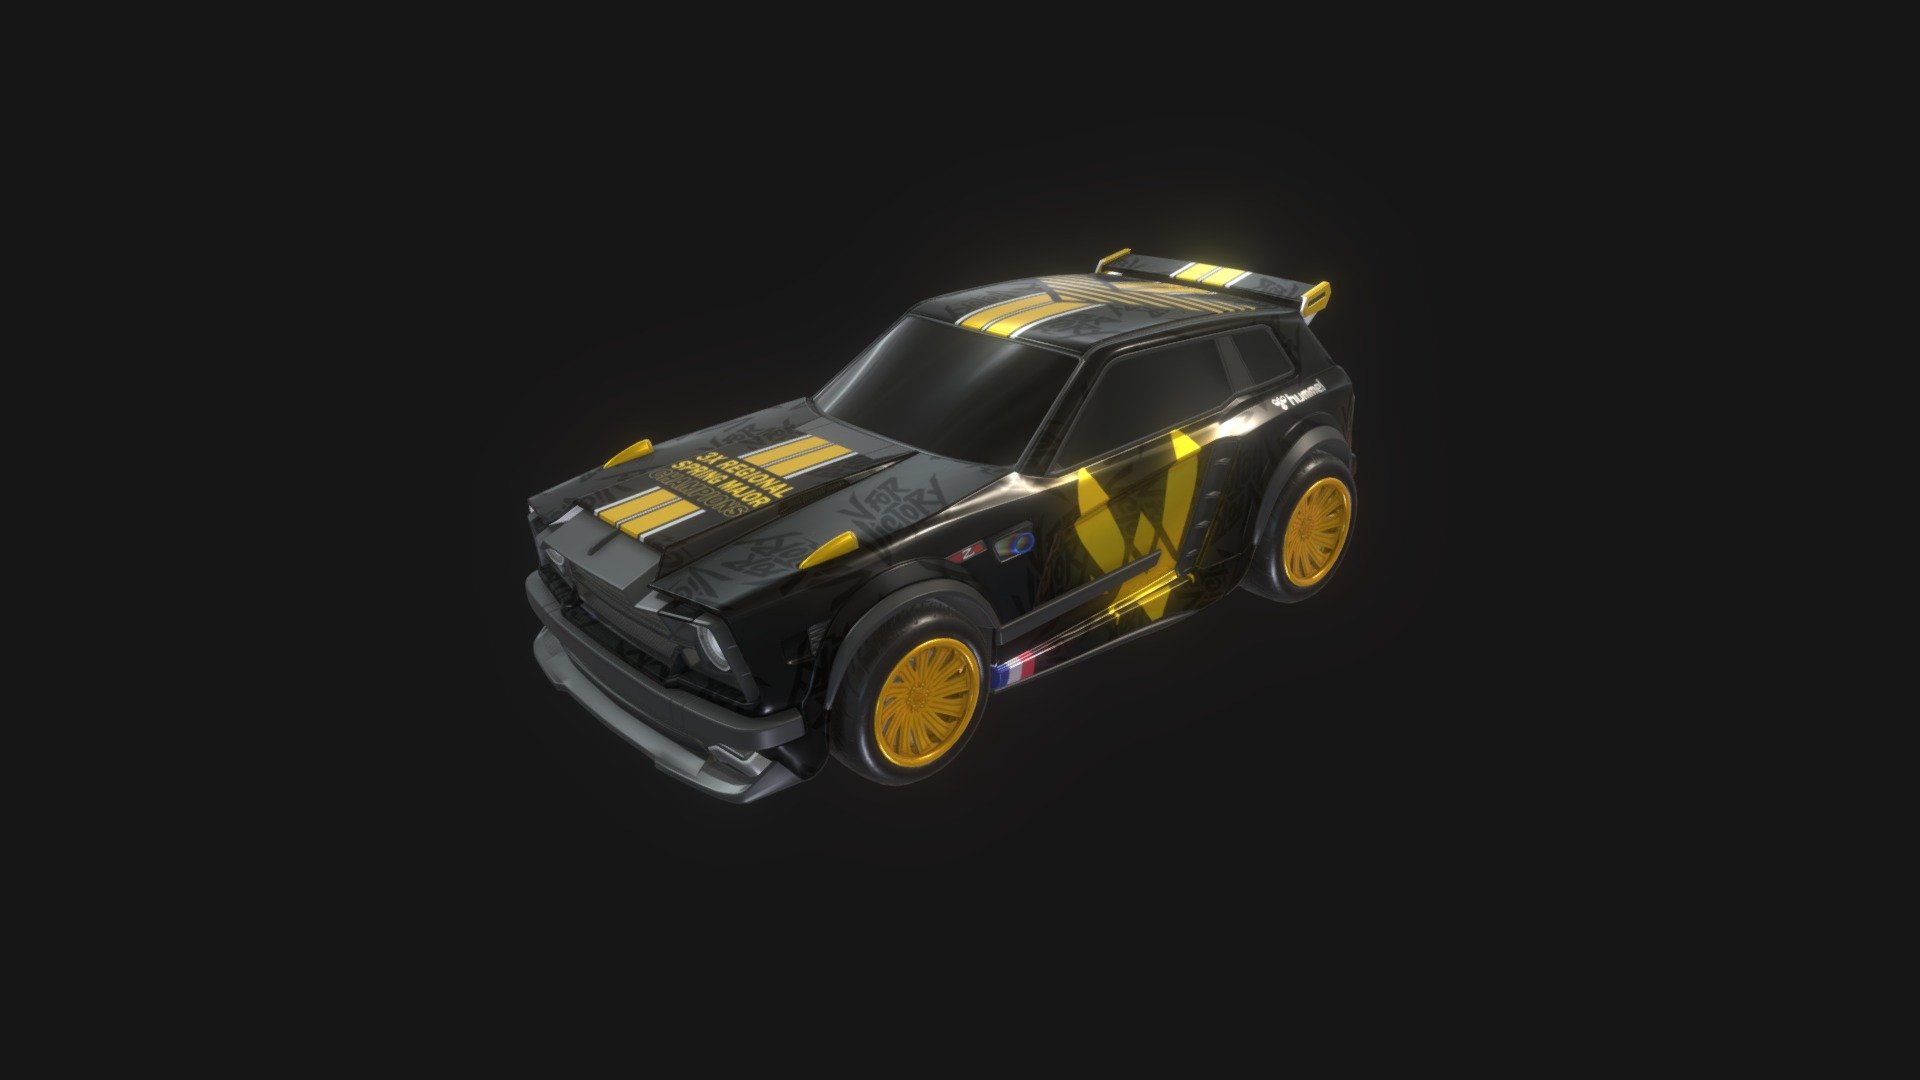 Team Vitality - Fennec Home | Worlds RLCS 2023

Vitality is one of the most iconic french esport team.

During the last split, they won every tournament they took part in. I decided to create a new decal to celebrate all these victories.

Players : Alpha54, Zen, Radosin

Coach : Ferra

Made with Blender, Photoshop &amp; Première Pro.

Socials networks :





Website : https://joudcazeaux.fr




Twitter : https://twitter.com/JoucazJC




Instagram : https://www.instagram.com/joucazjc/ 




Youtube : https://www.youtube.com/@joucaz




Behance : https://www.behance.net/joucaz


 - Team Vitality - Fennec Home | Worlds RLCS 2023 - 3D model by Joud "Joucaz" Cazeaux (@Joucaz) 3d model